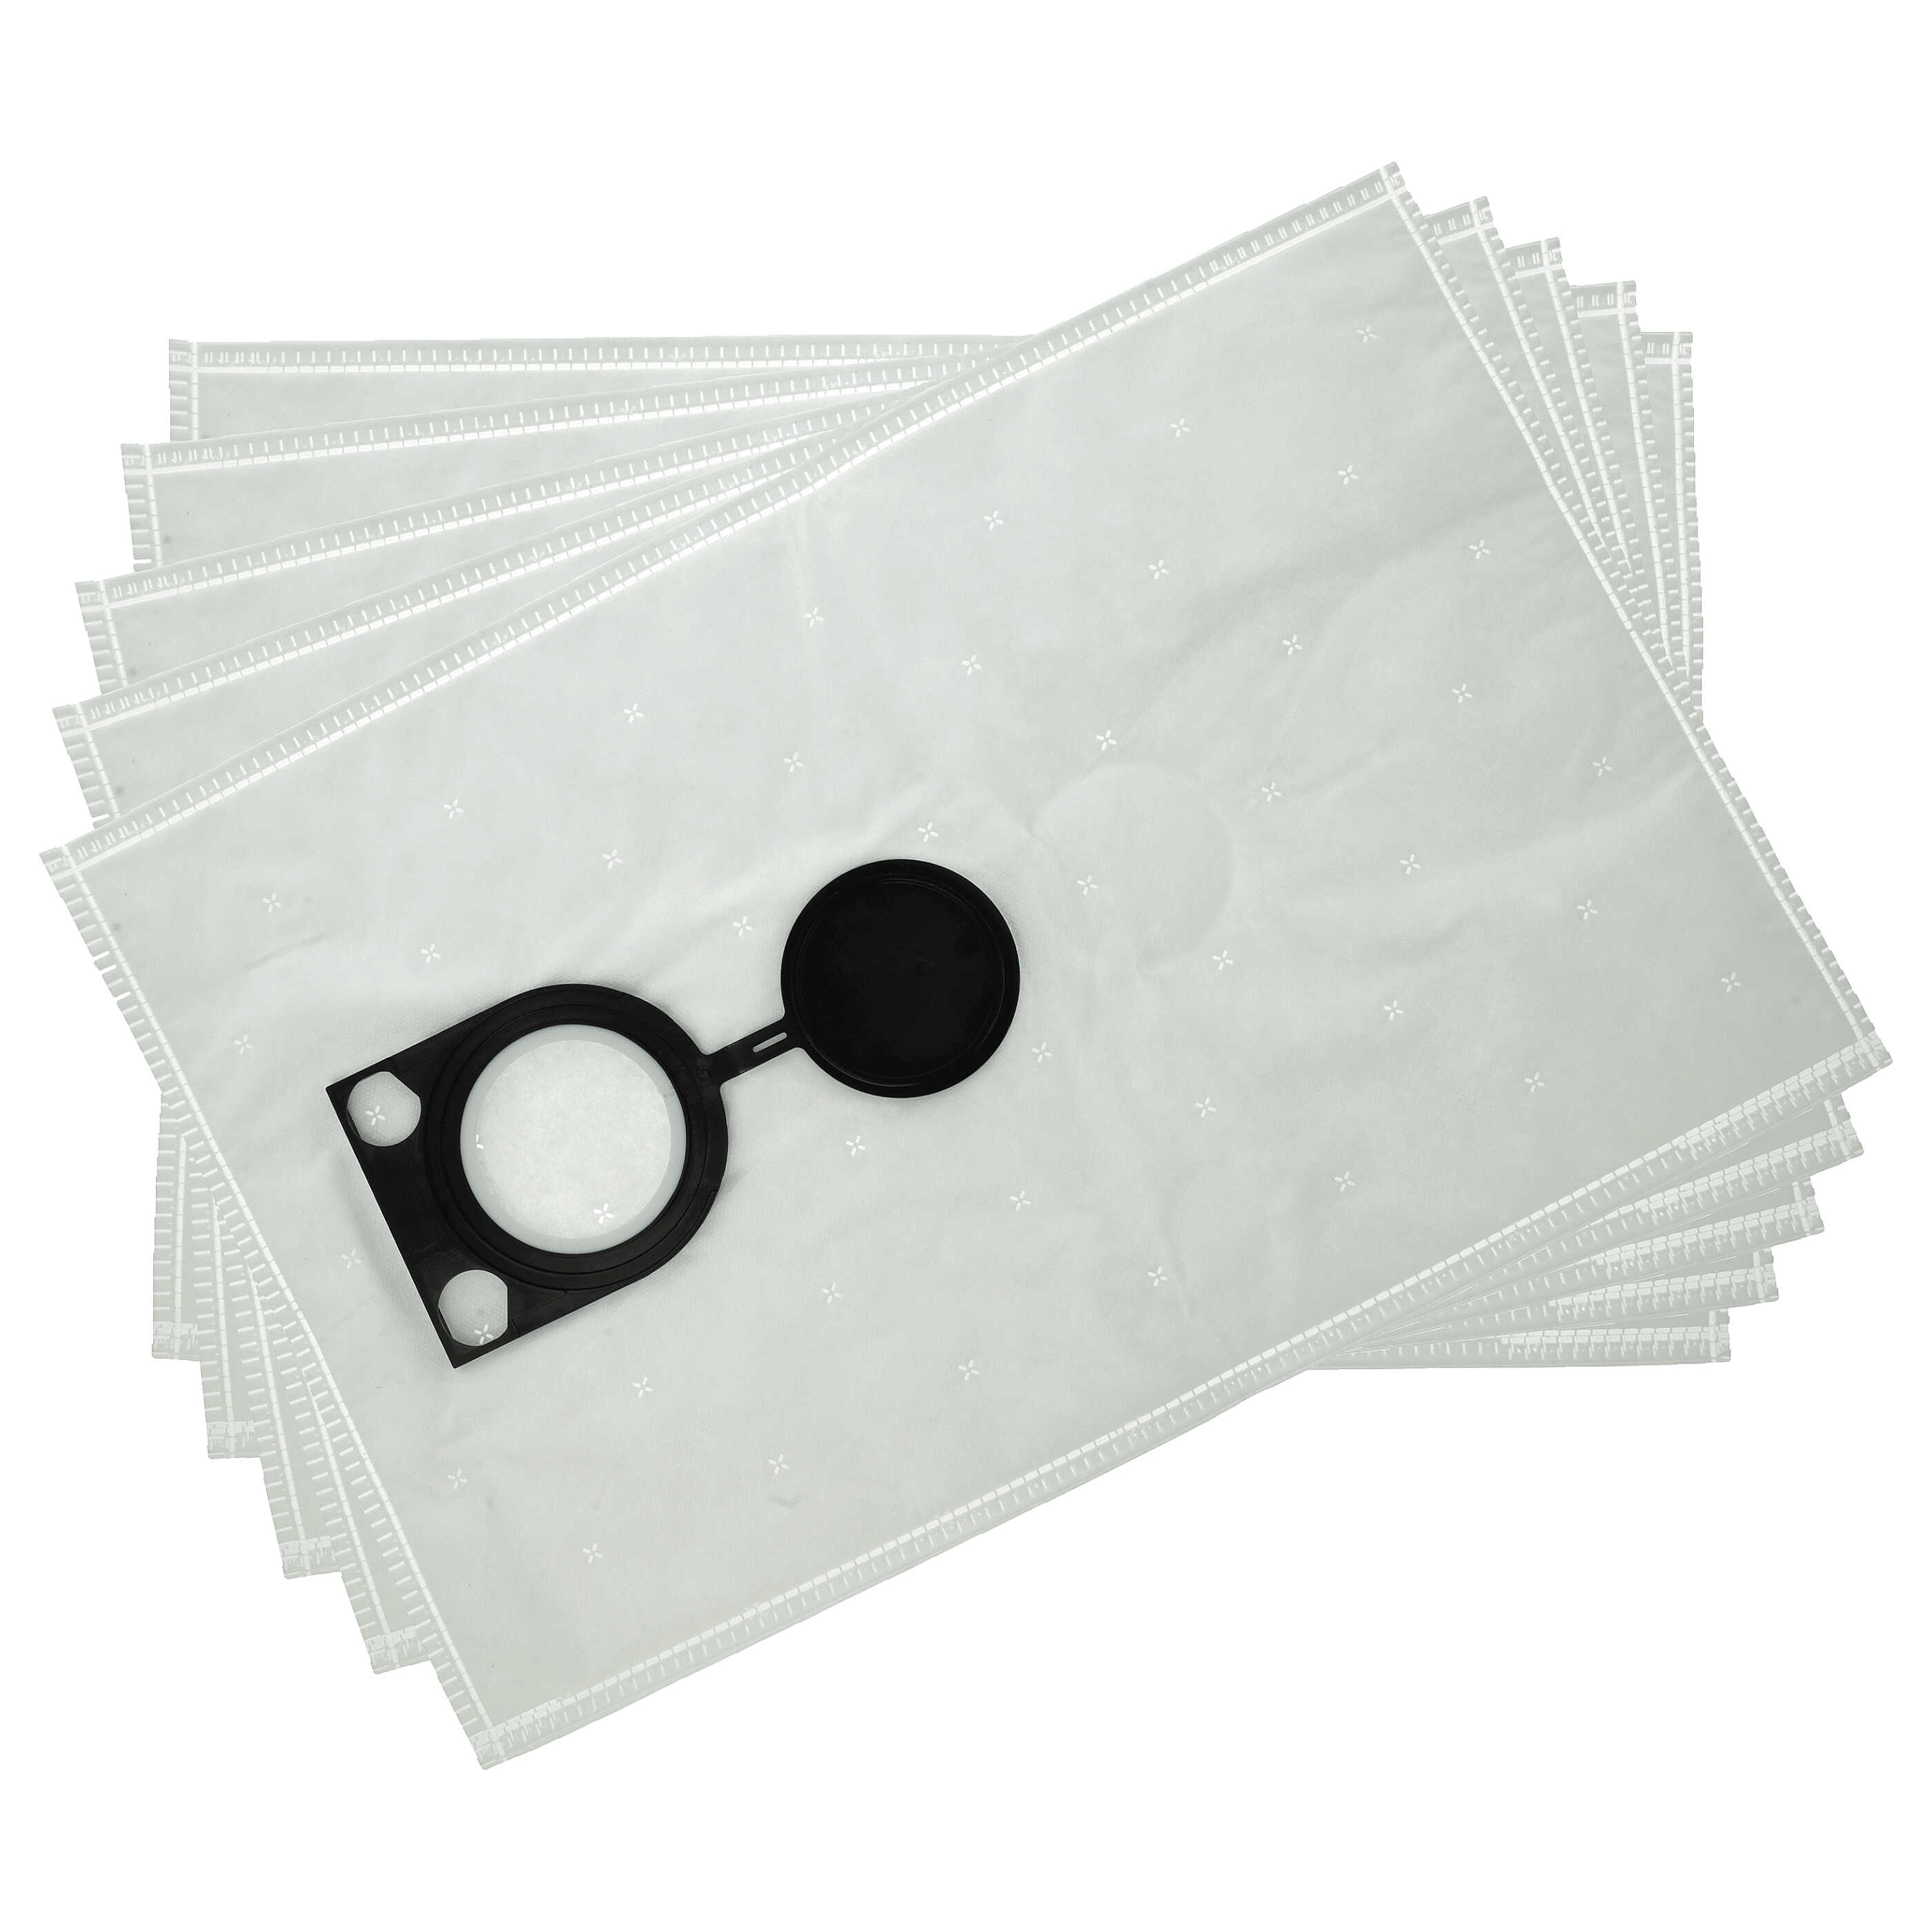 5x Vacuum Cleaner Bag replaces Bosch 2607432037 for Bosch - microfleece